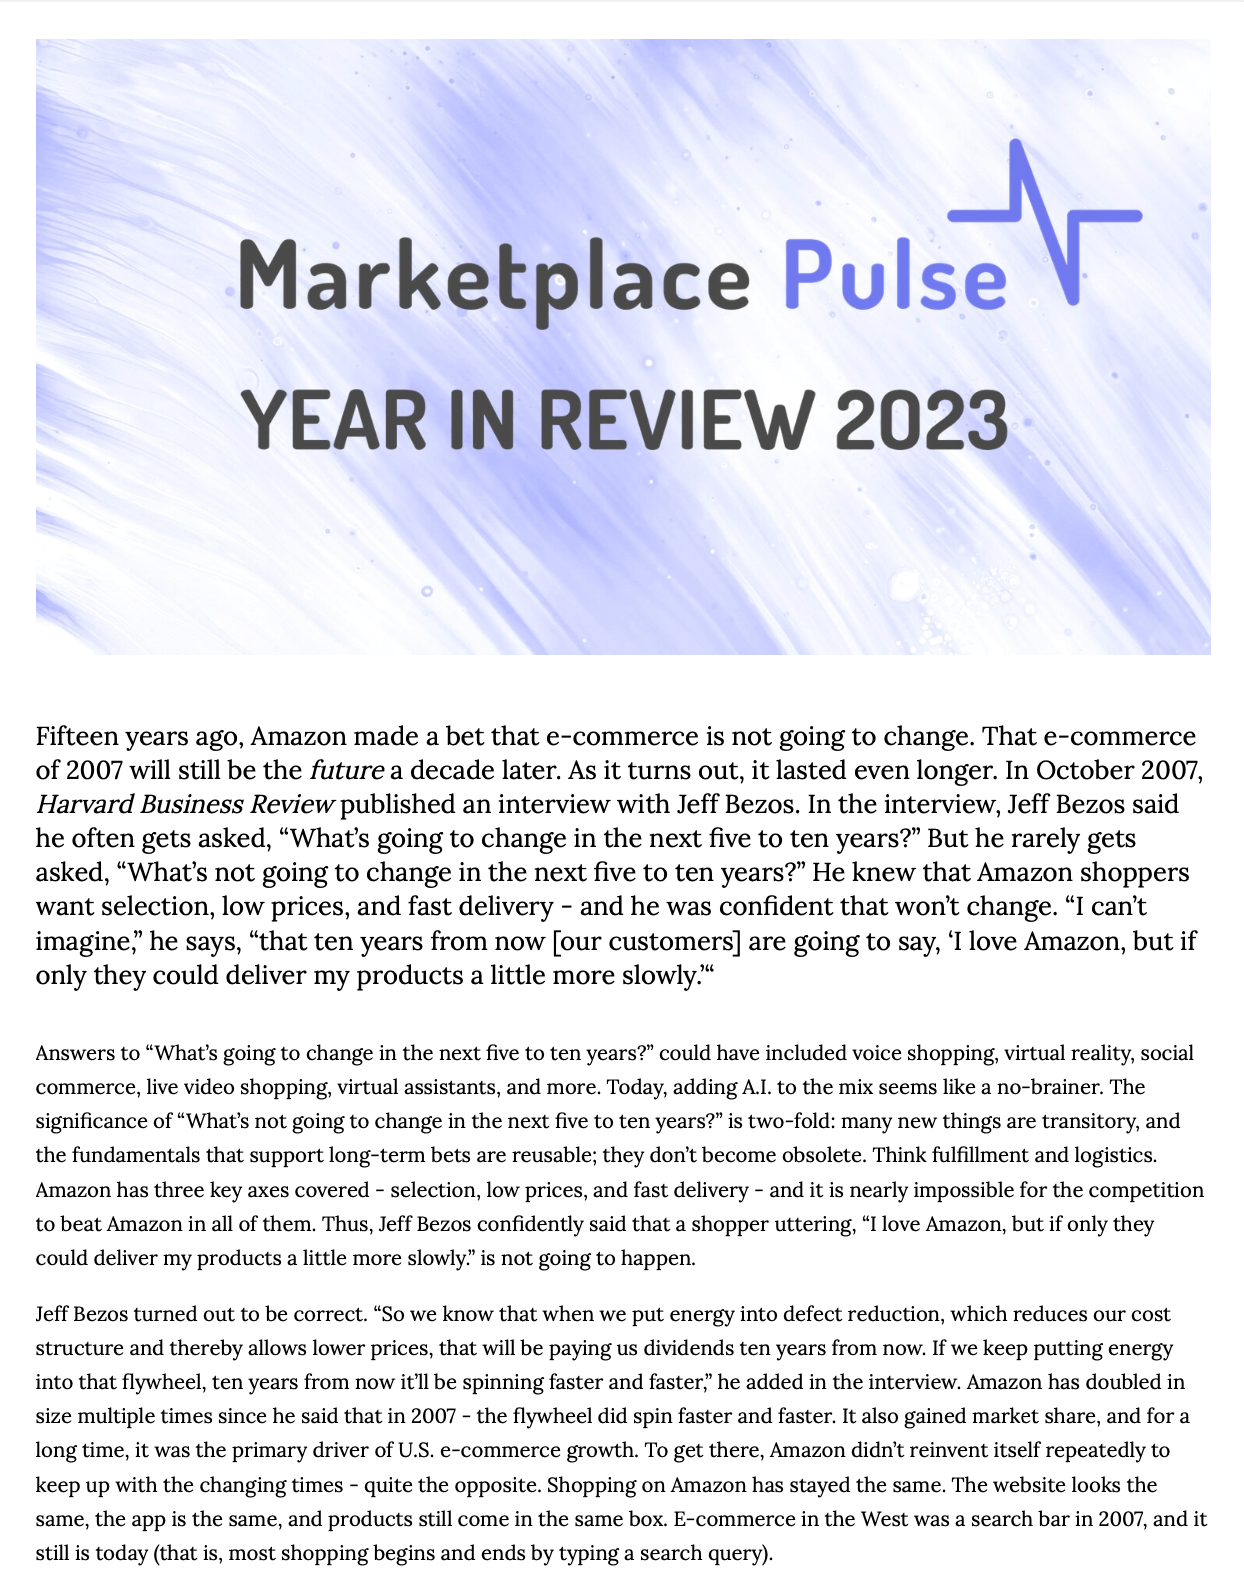 Marketplace Pulse Year in Review 2023